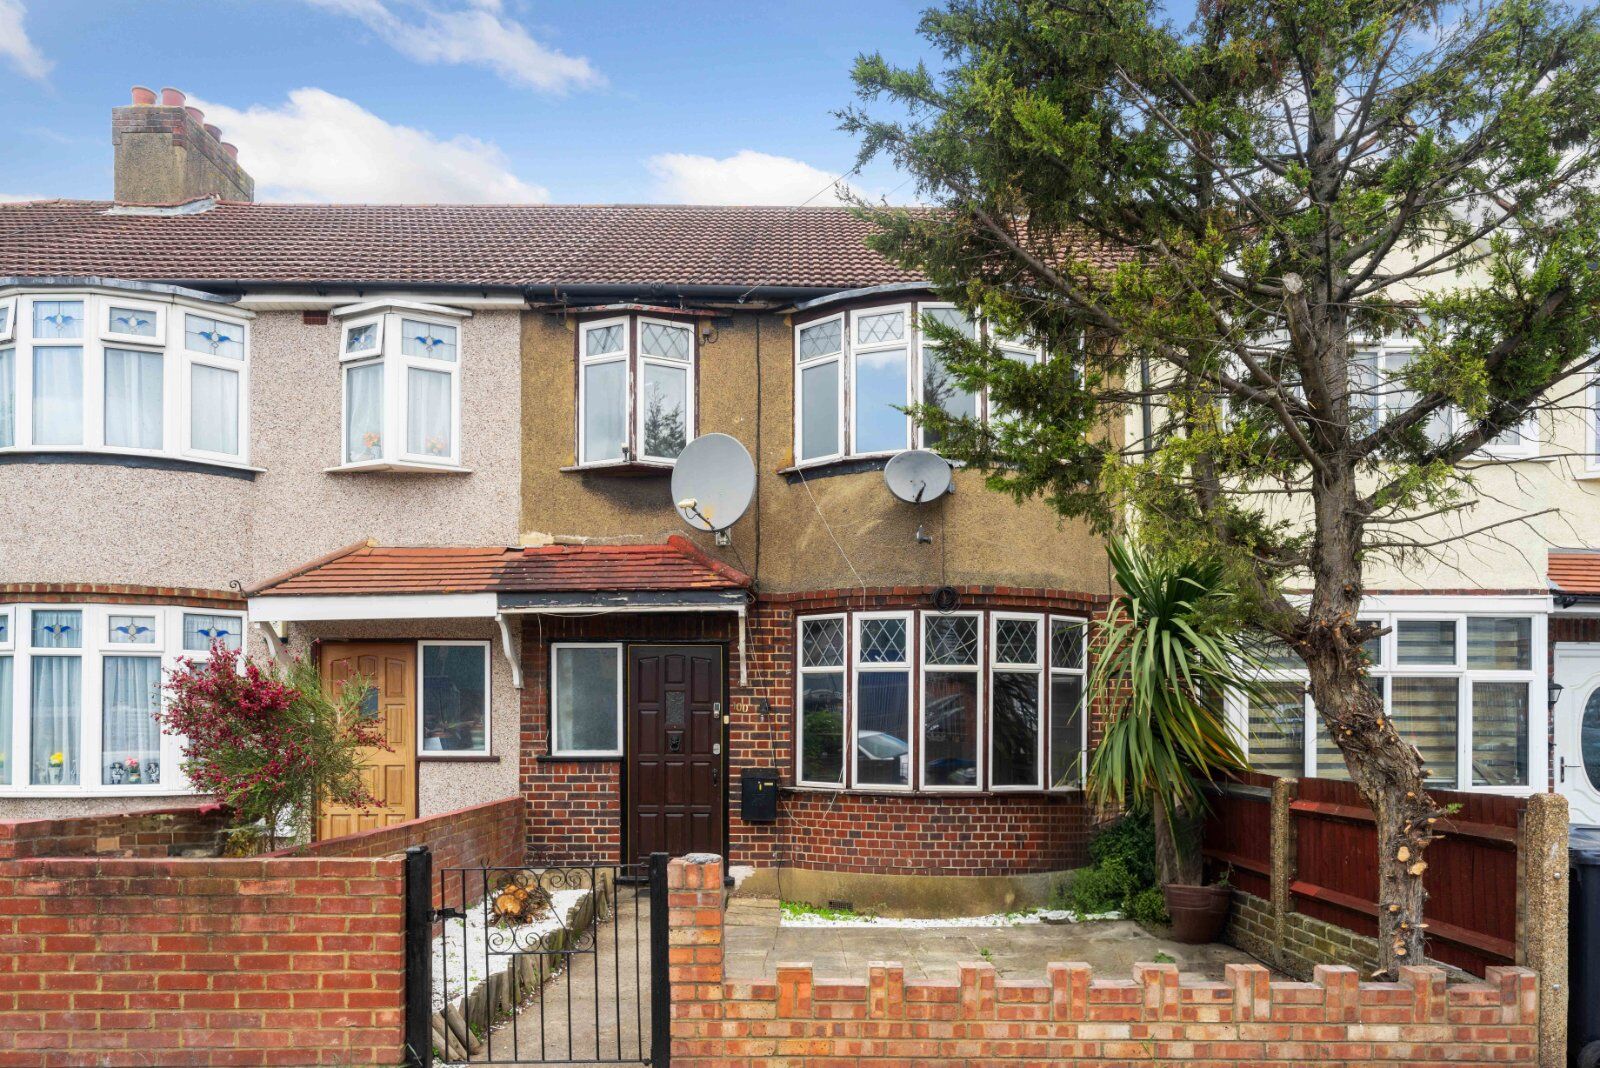 4 bedroom mid terraced house for sale Bond Road, Mitcham, CR4, main image